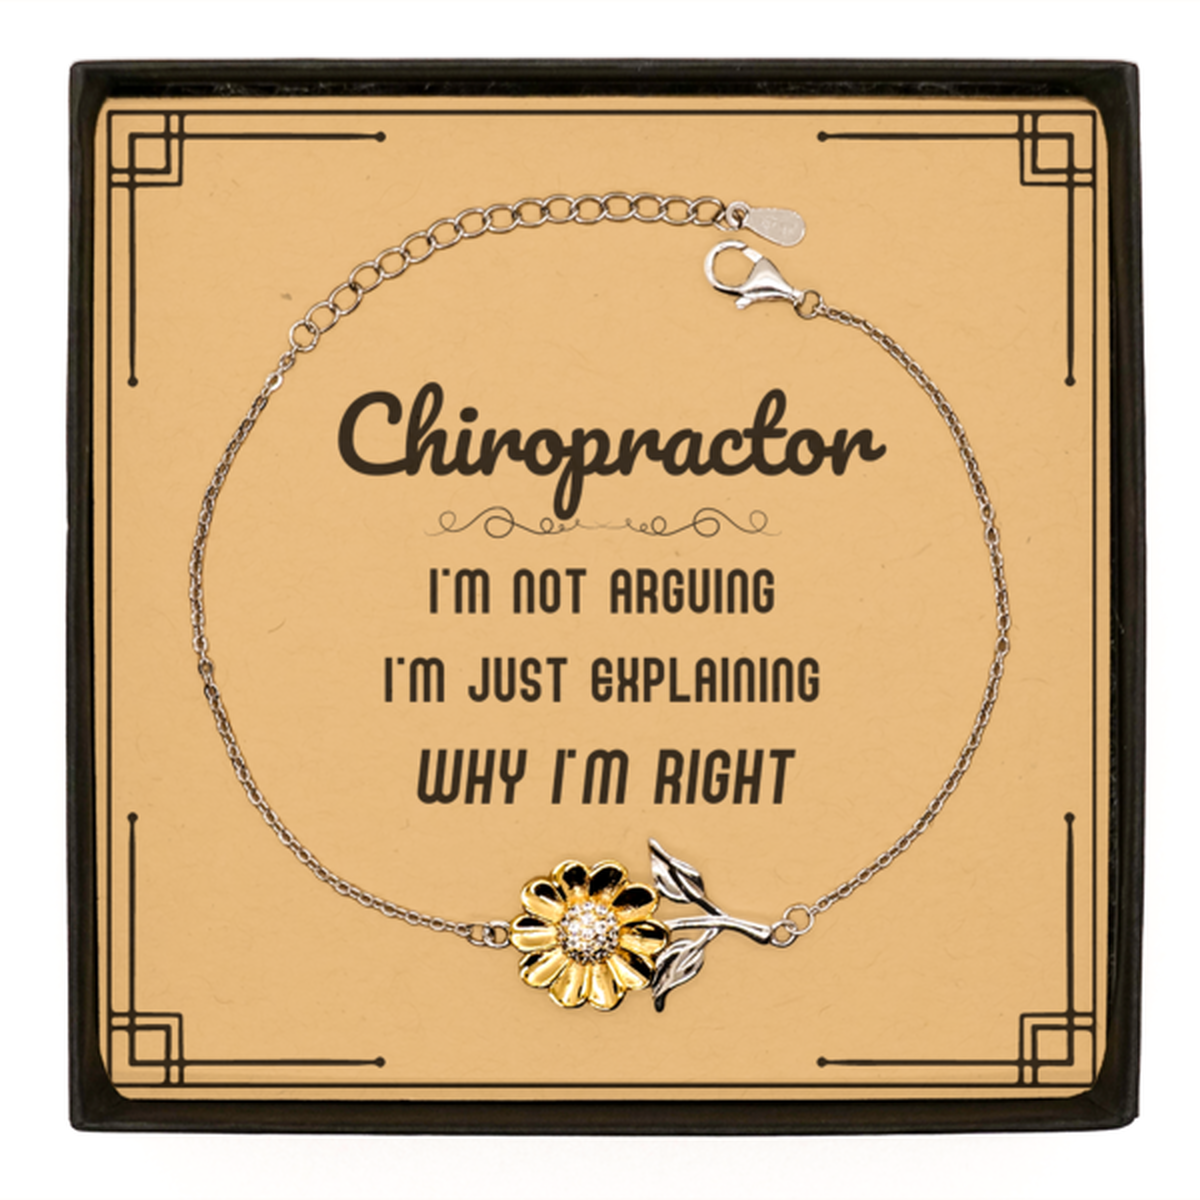 Chiropractor I'm not Arguing. I'm Just Explaining Why I'm RIGHT Sunflower Bracelet, Funny Saying Quote Chiropractor Gifts For Chiropractor Message Card Graduation Birthday Christmas Gifts for Men Women Coworker